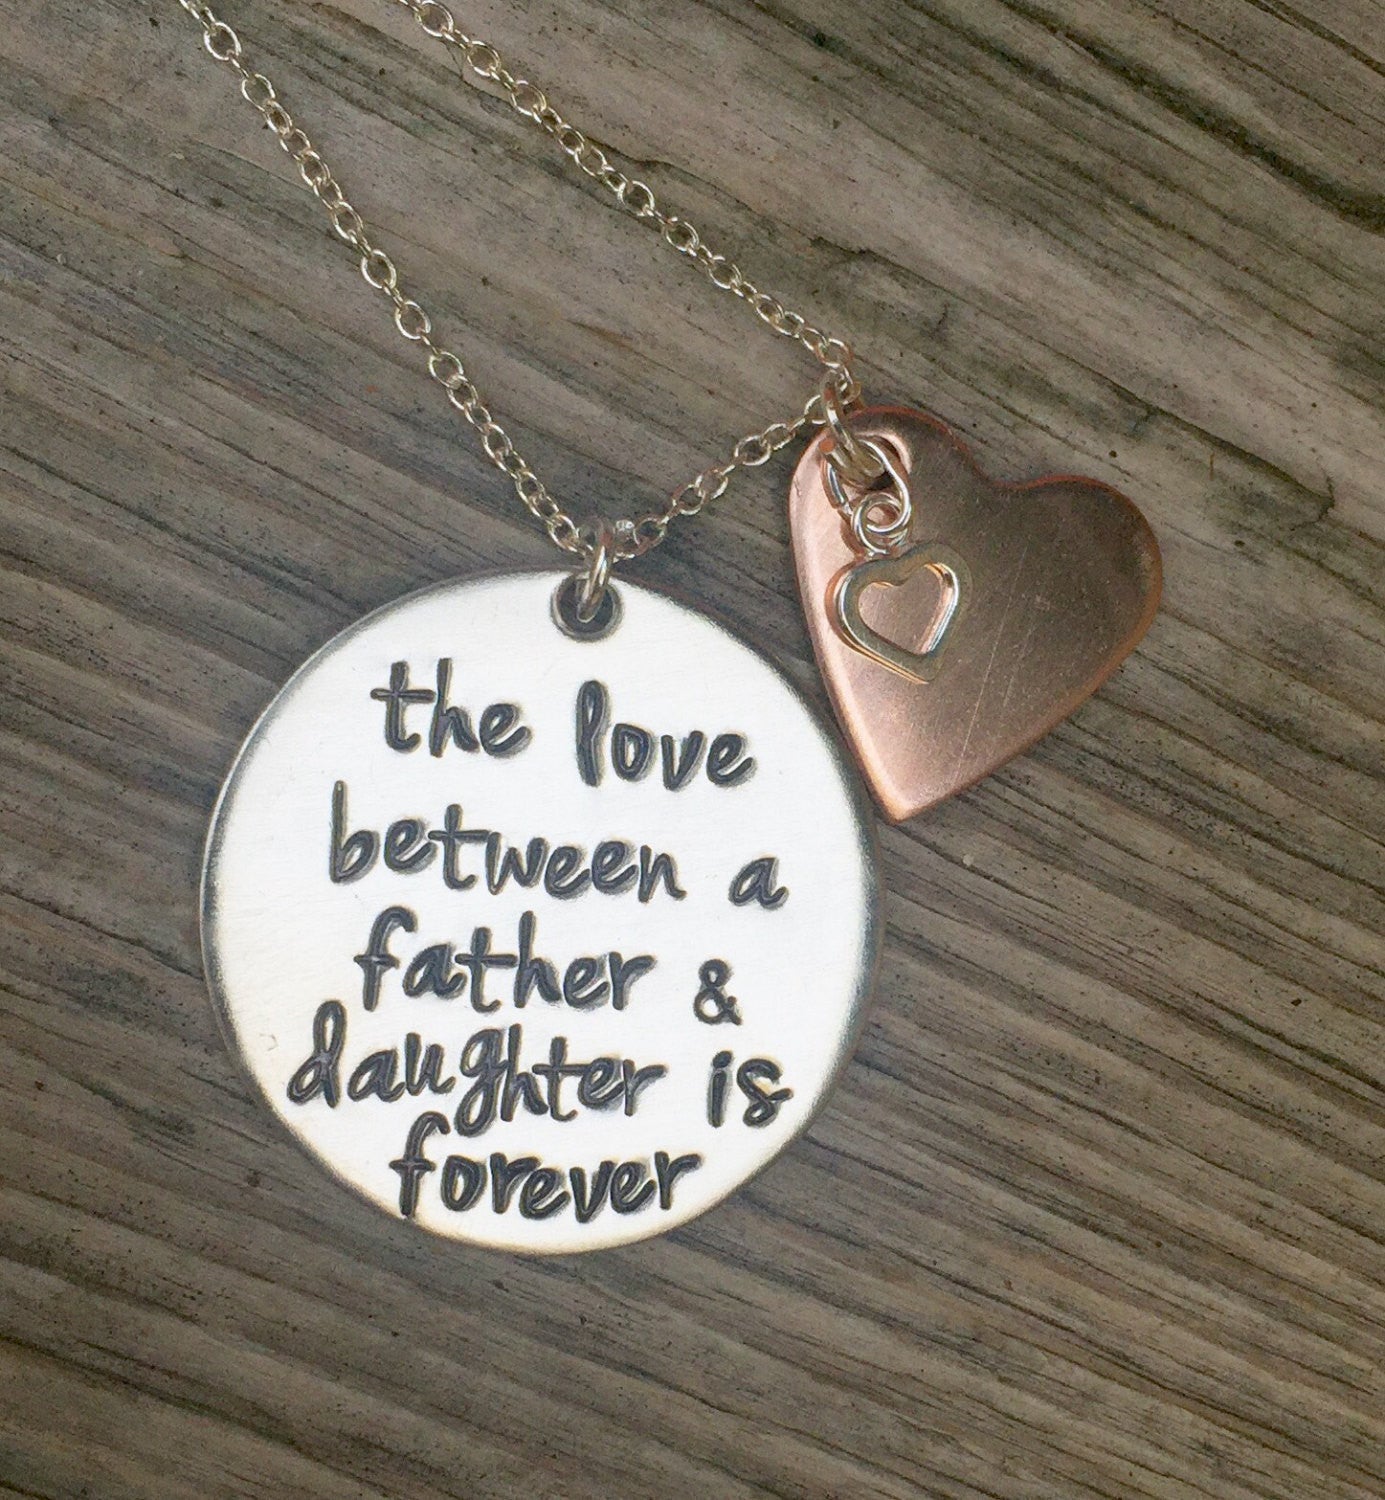 The Love Between A Father and Daughter is Forever Necklace - Natashaaloha, jewelry, bracelets, necklace, keychains, fishing lures, gifts for men, charms, personalized, 